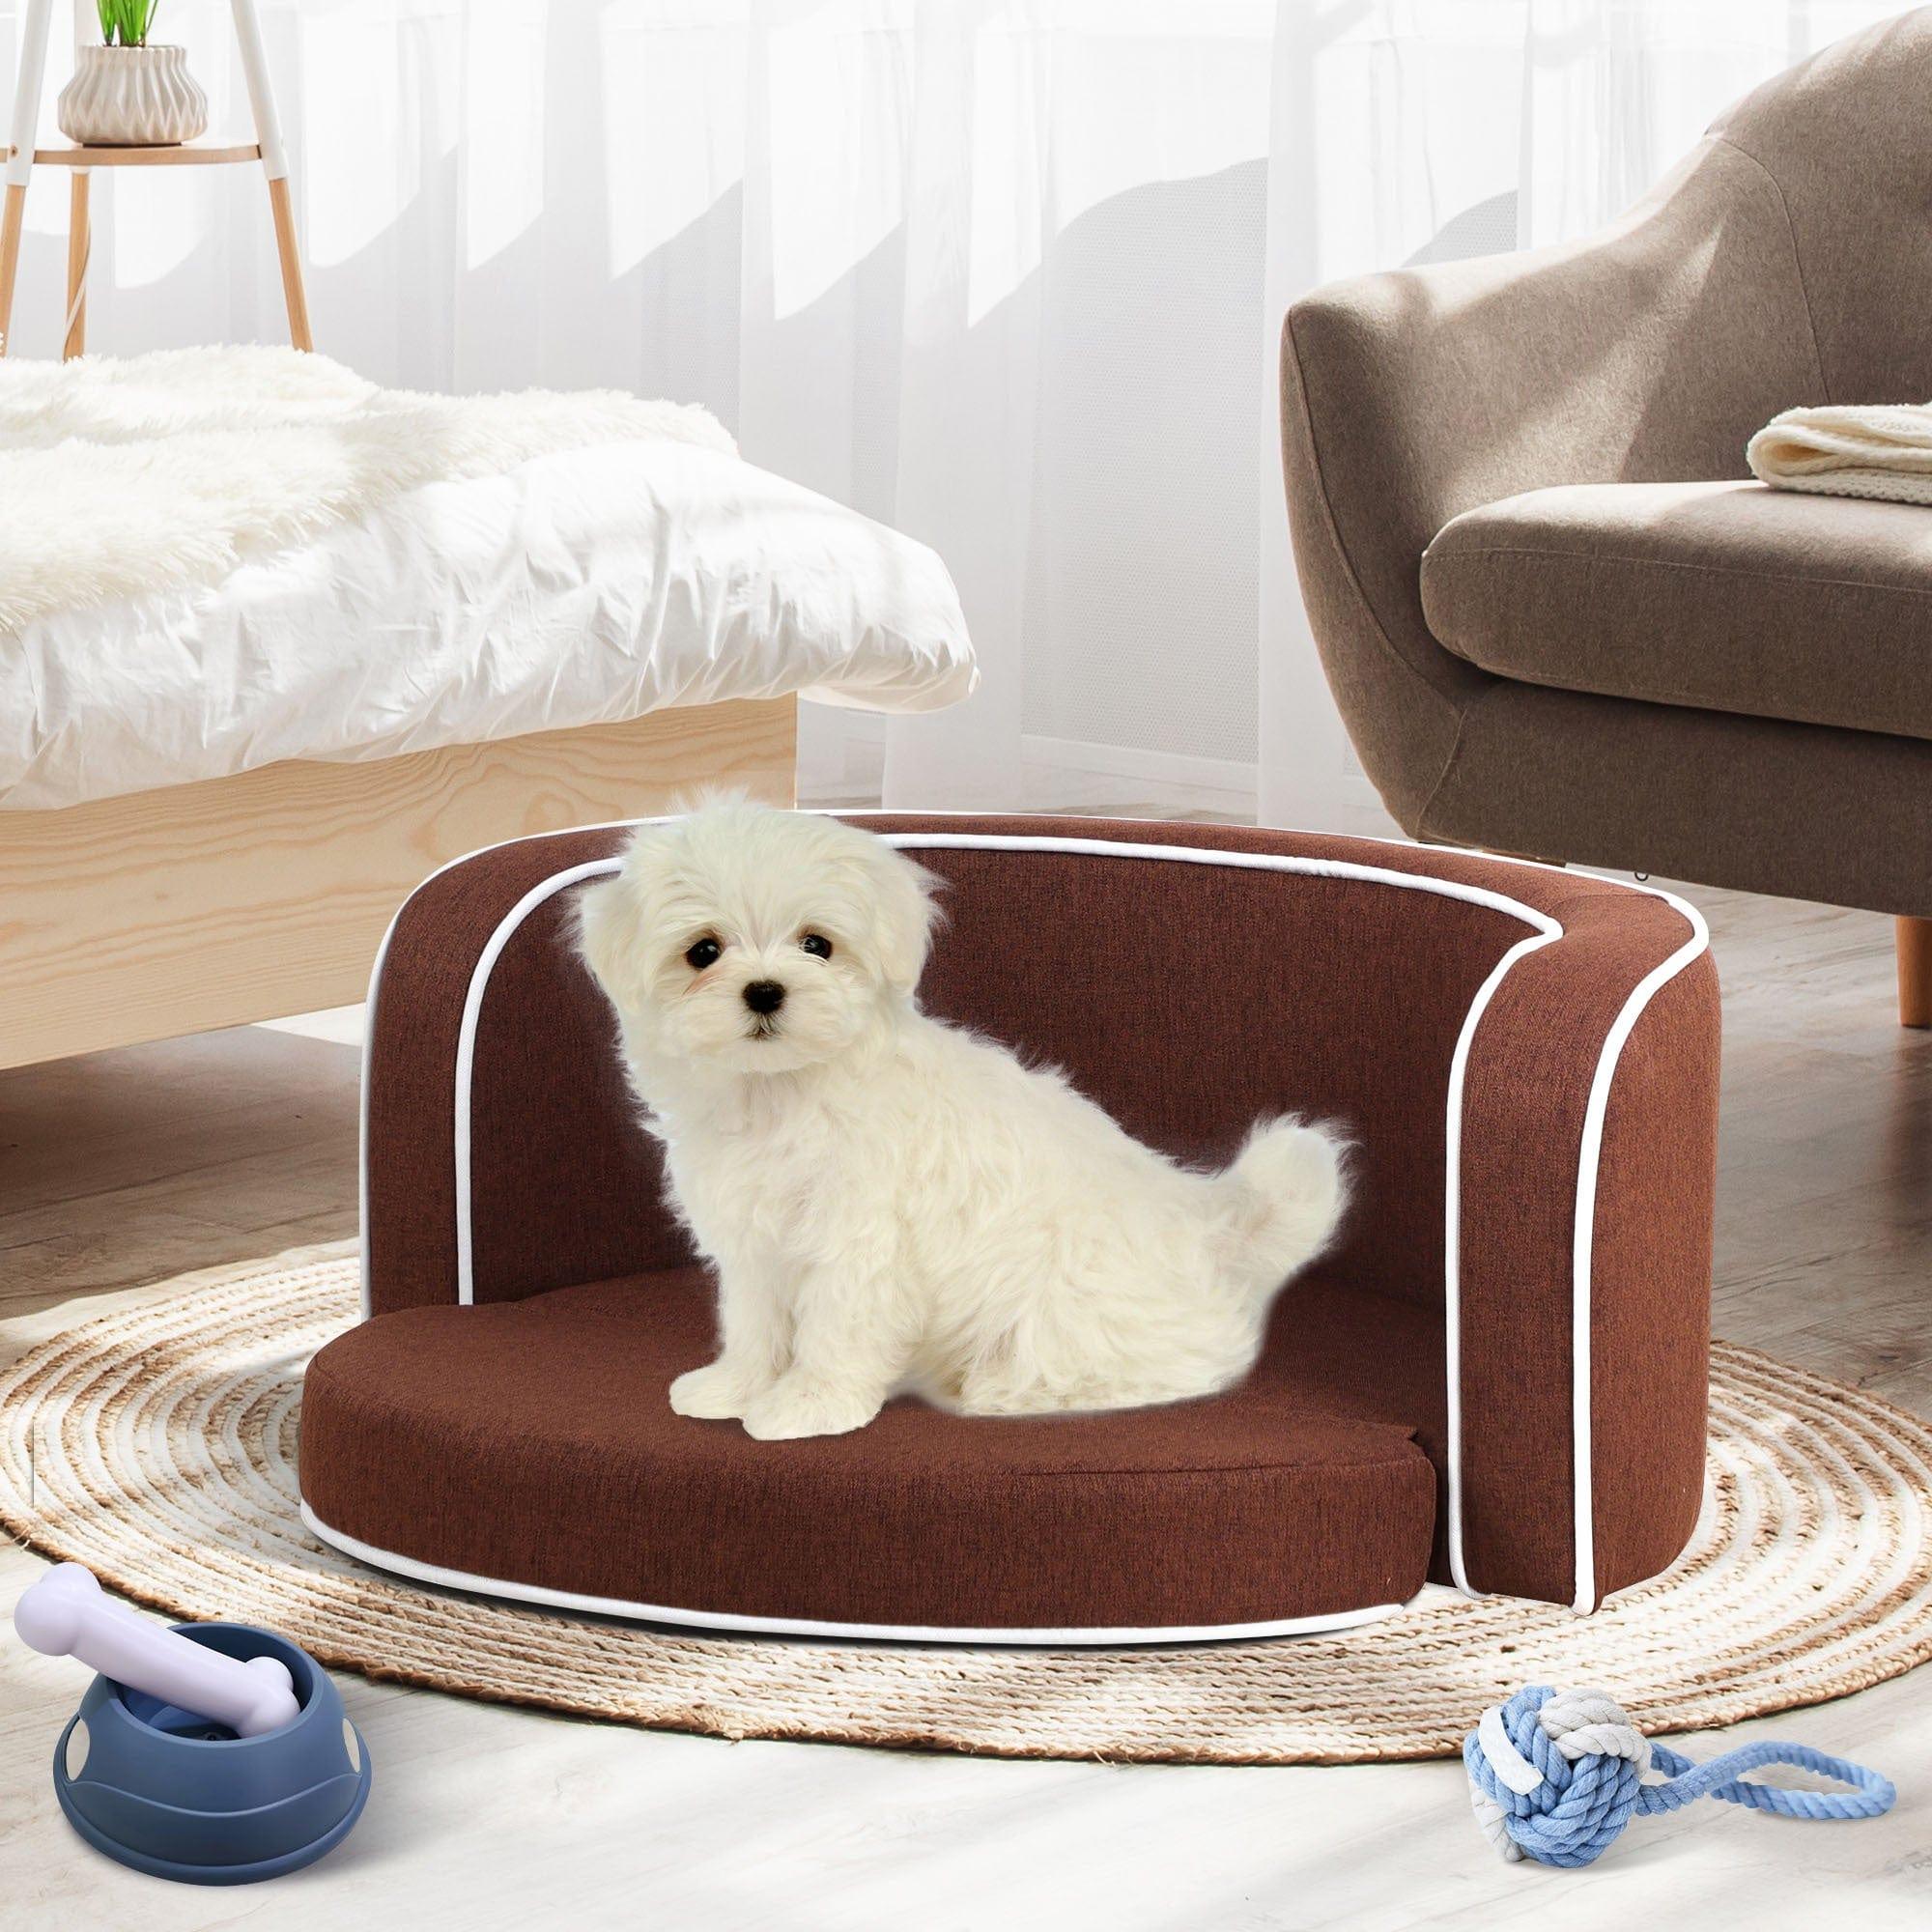 Shop 30" Brown Round Pet Sofa, Dog sofa, Dog bed, Cat Bed, Cat Sofa, with Wooden Structure and Linen Goods White Roller Lines on the Edges Curved Appearance pet Sofa with Cushion Mademoiselle Home Decor